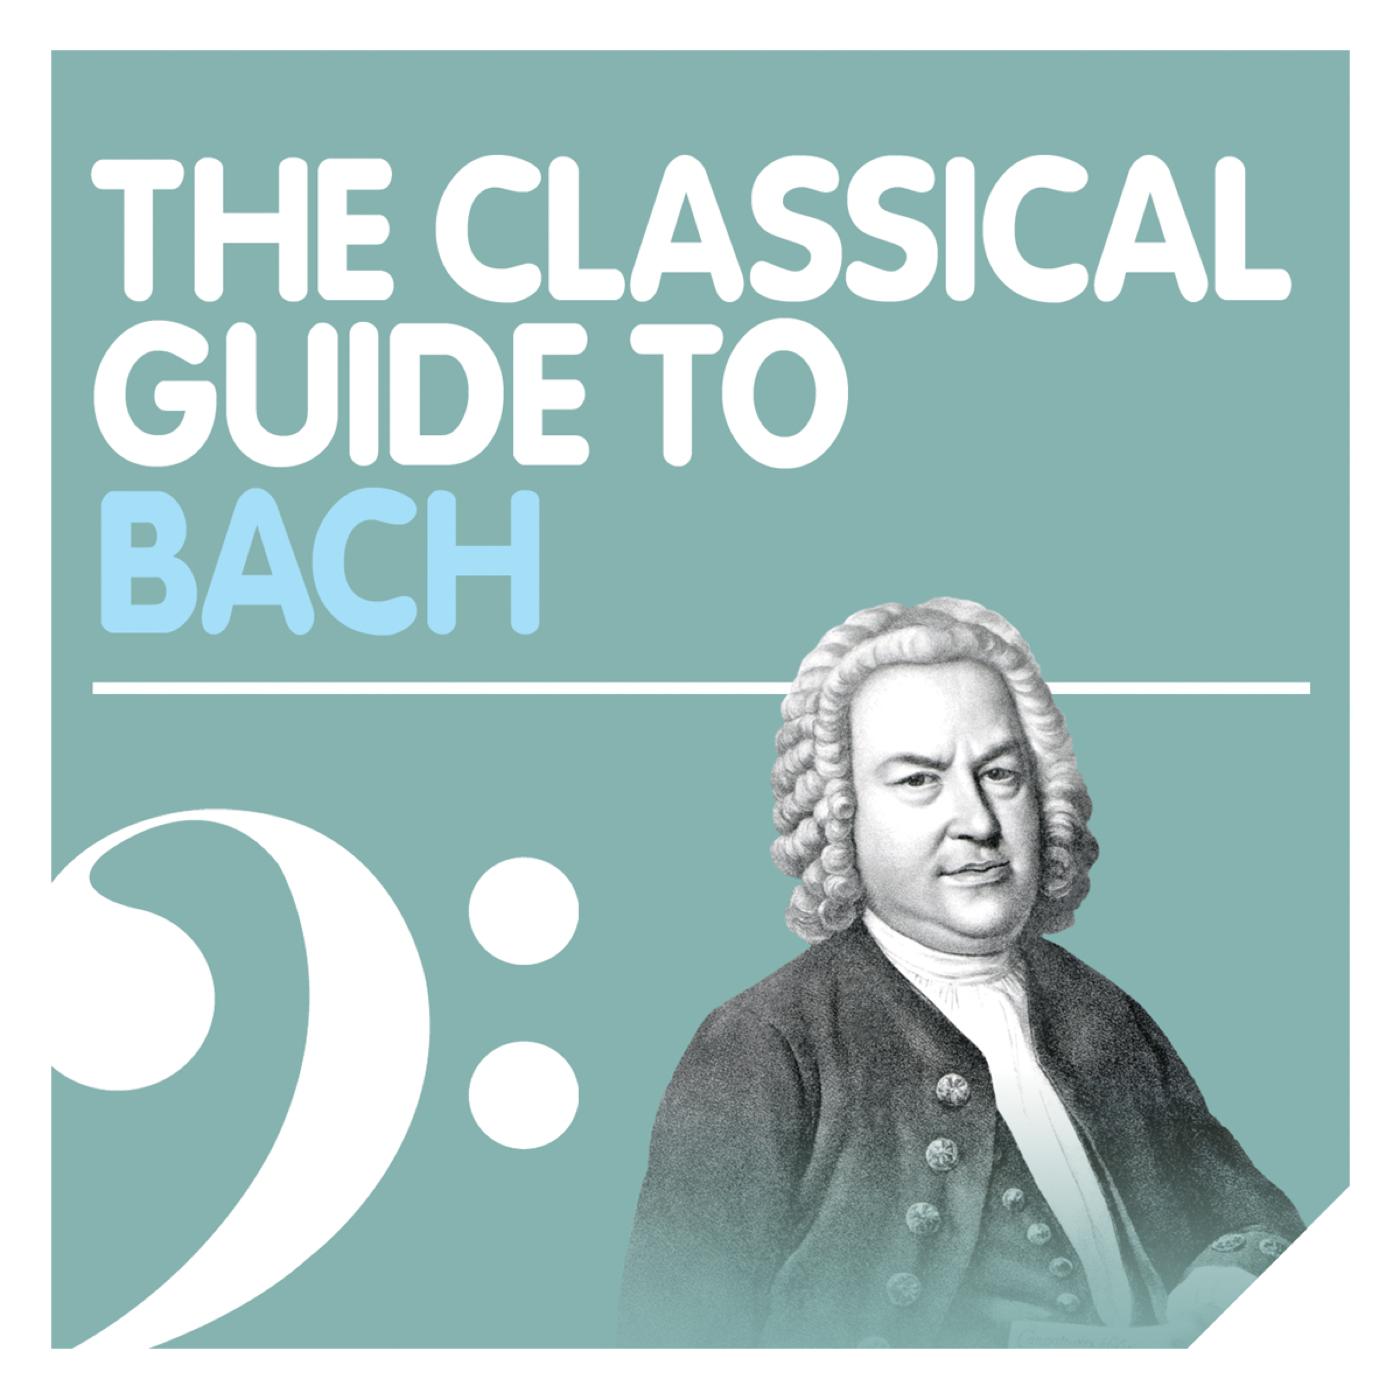 The Classical Guide to Bach